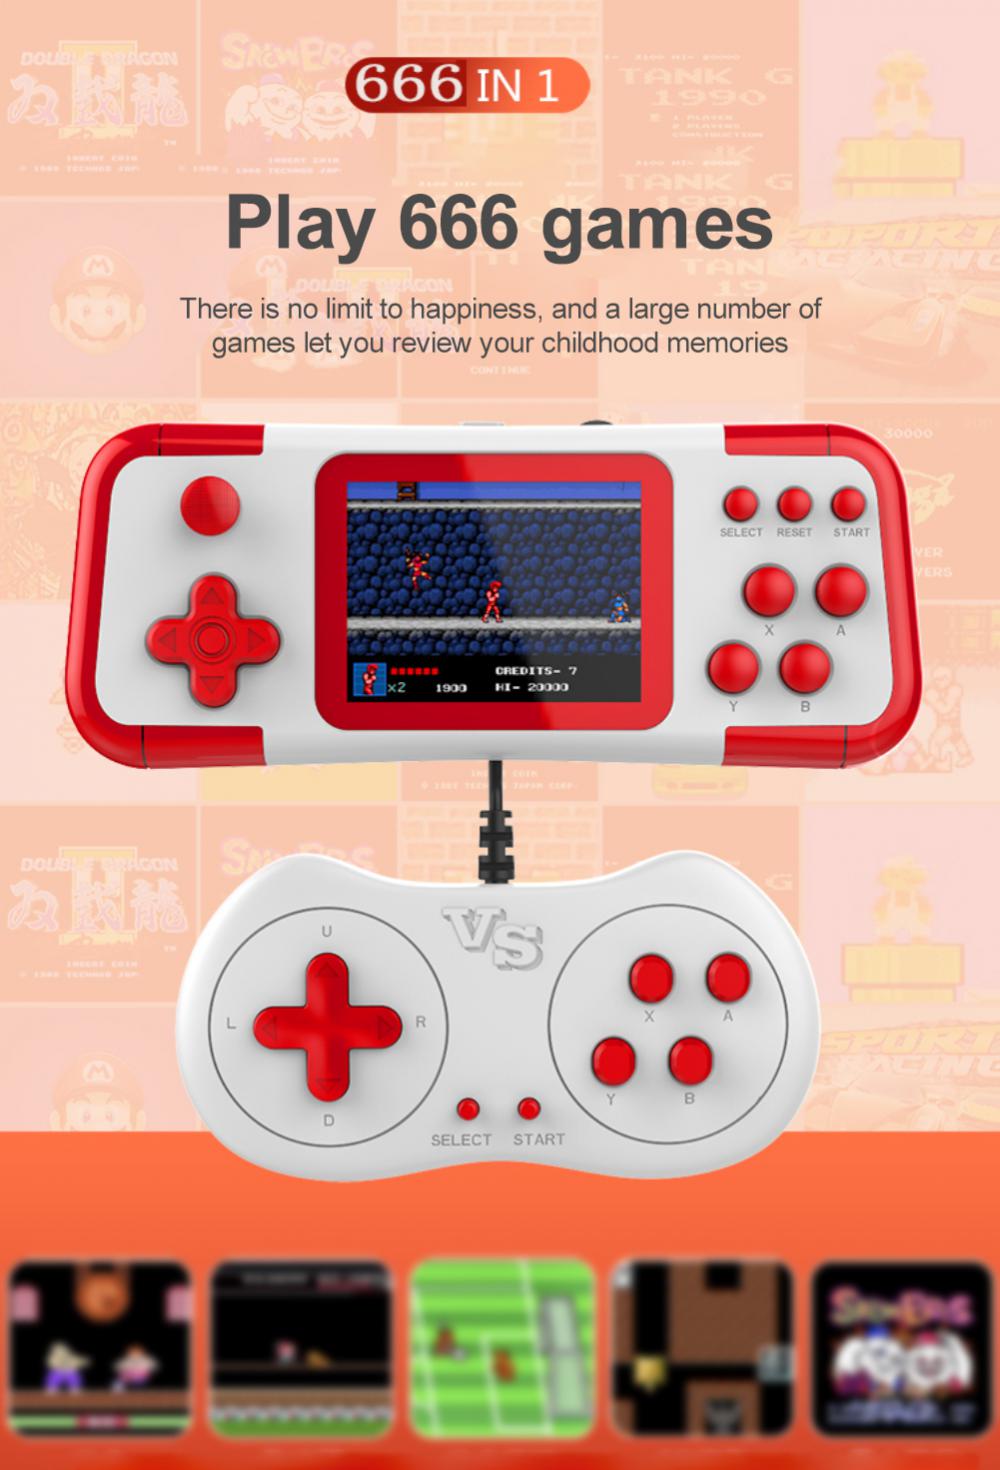 A12-30inch-TFT-HD-Color-Screen-Retro-Handheld-Game-Console-Built-in-666-Classic-Games-3D-Joystick-Po-1976539-1